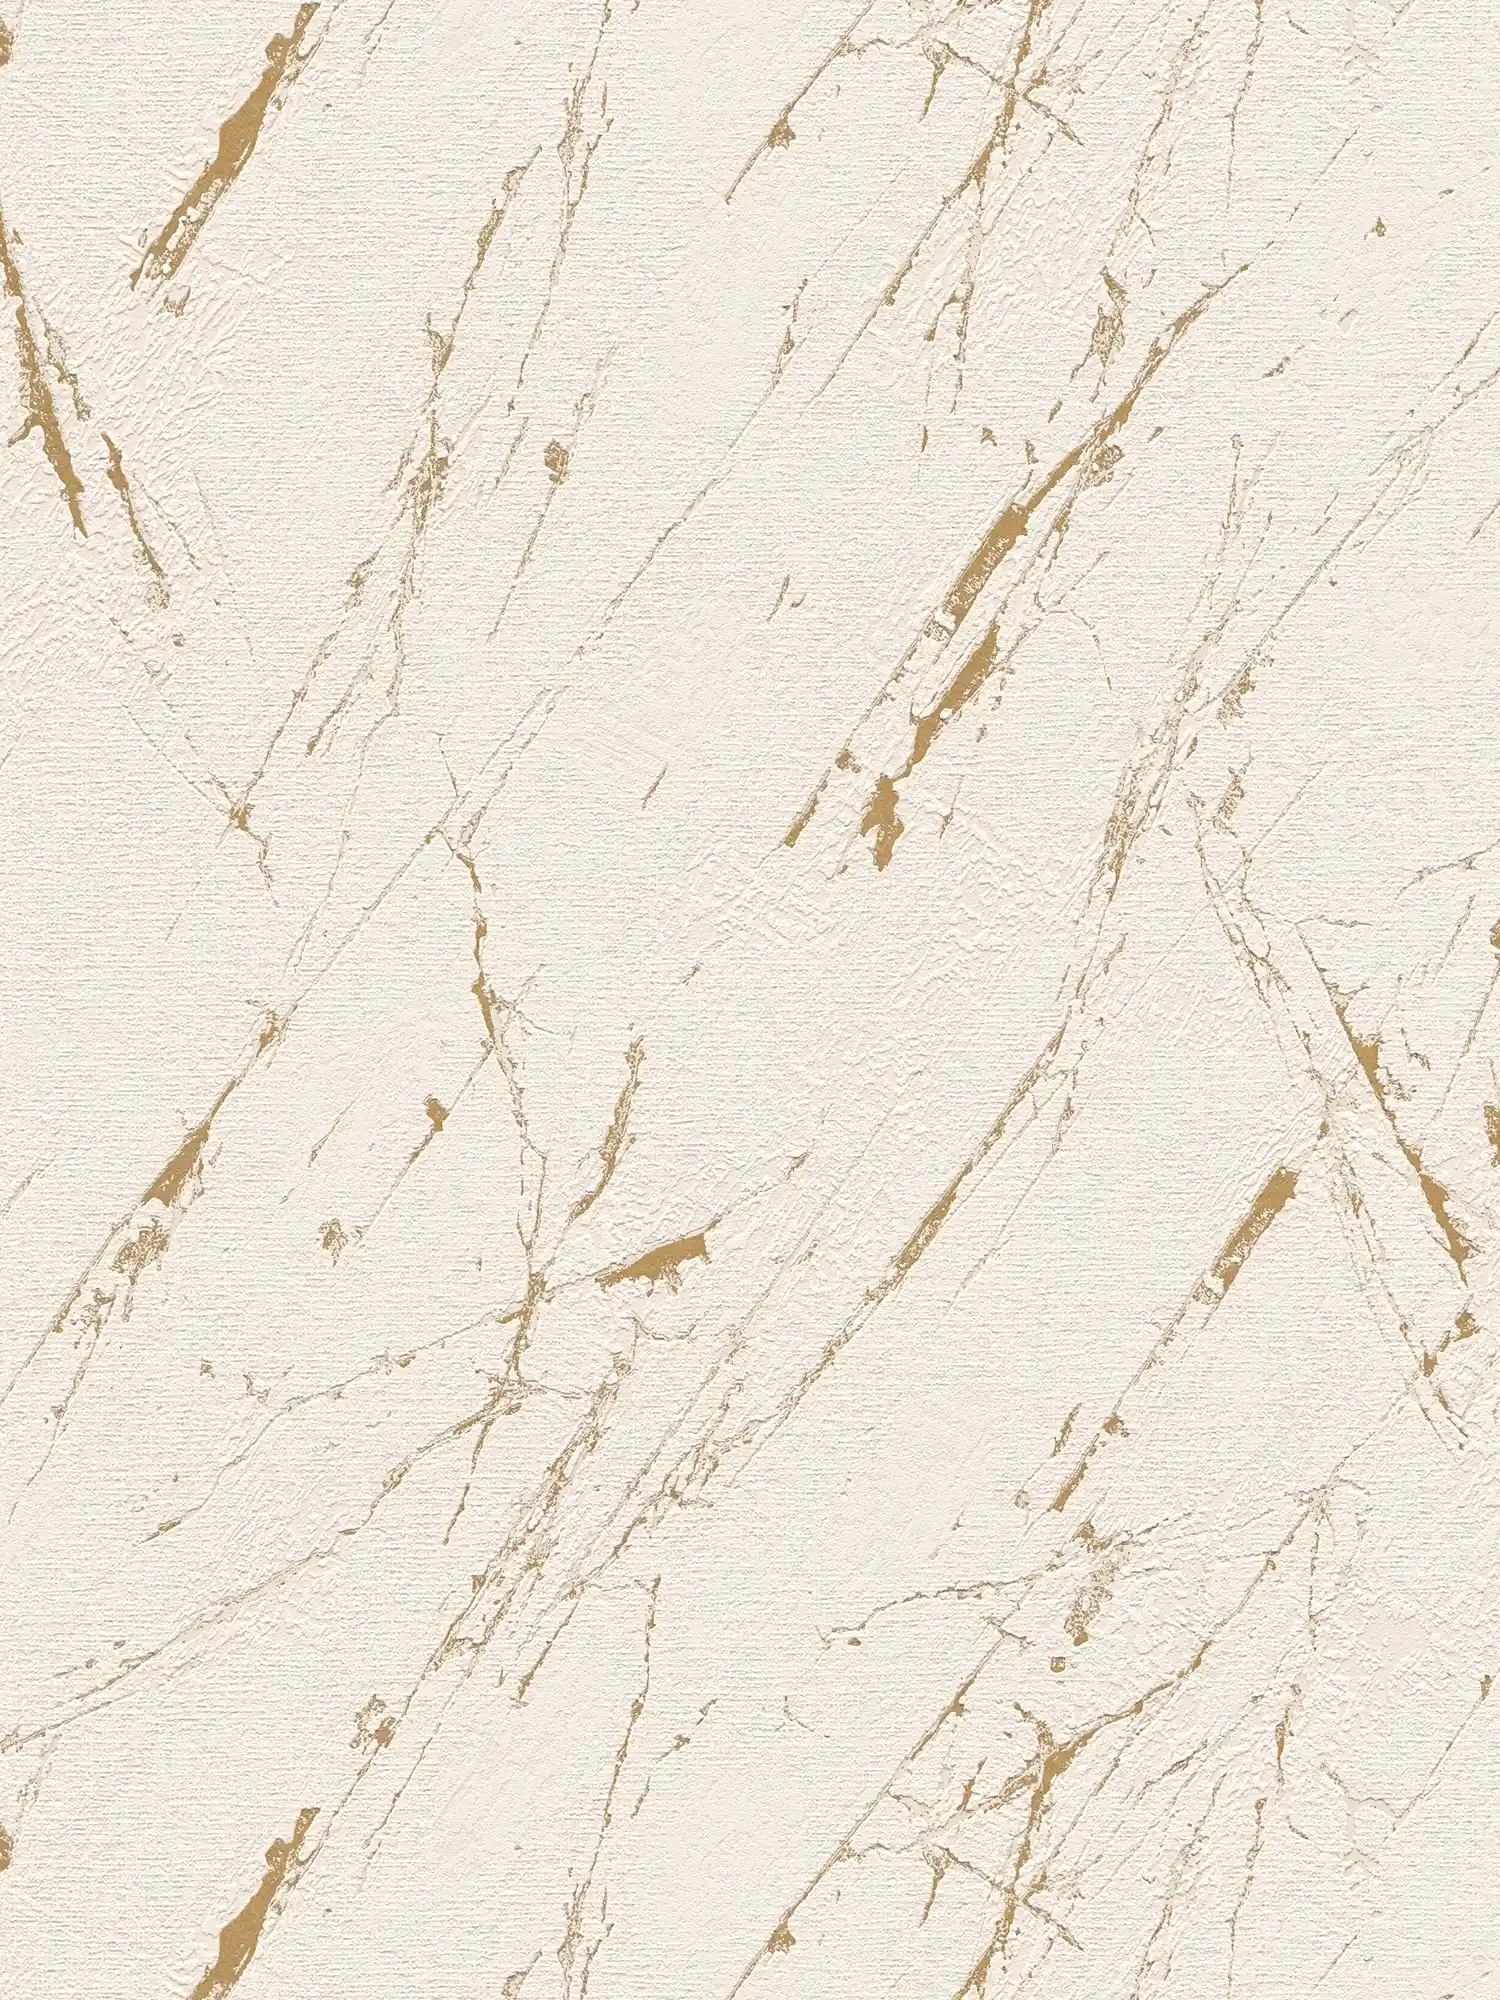 Non-woven wallpaper plaster look with gold accents - beige, gold, metallic
